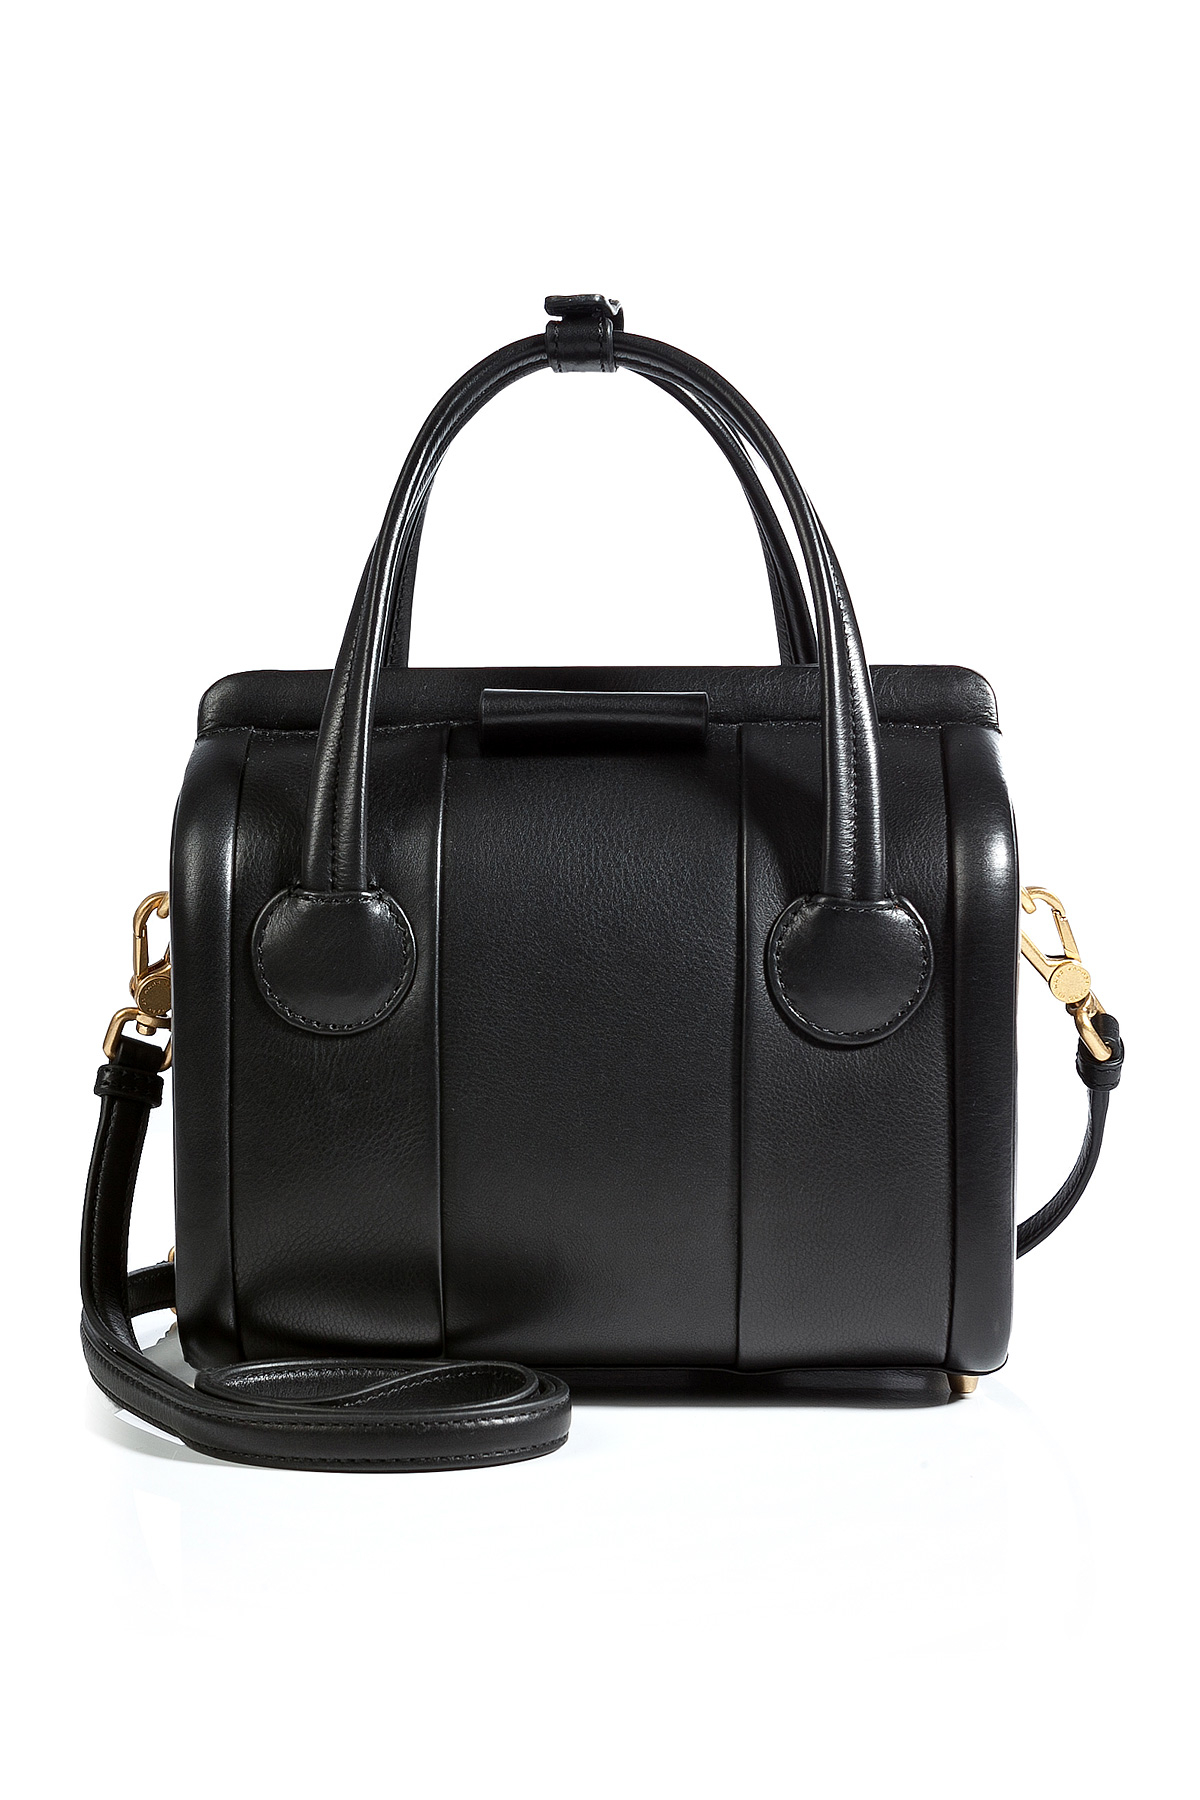 Marc by marc jacobs Leather Small Mathide Crossbody Bag in Black in Black | Lyst